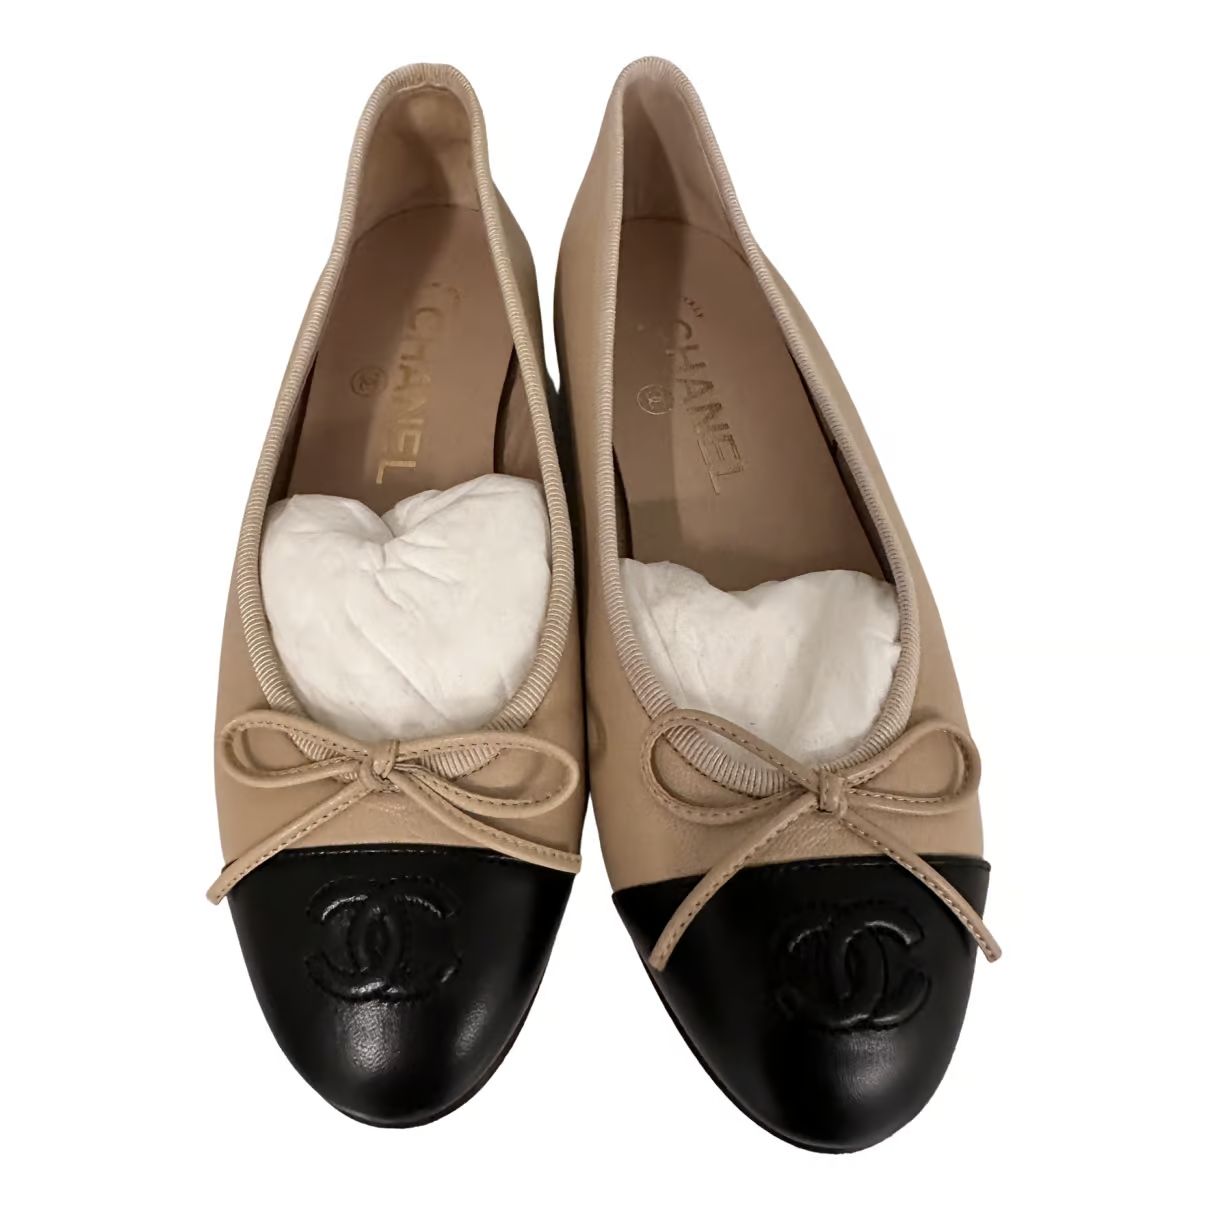 Chanel Women's Ballet flats | Buy or Sell Designer shoes - Vestiaire Collective | Vestiaire Collective (Global)